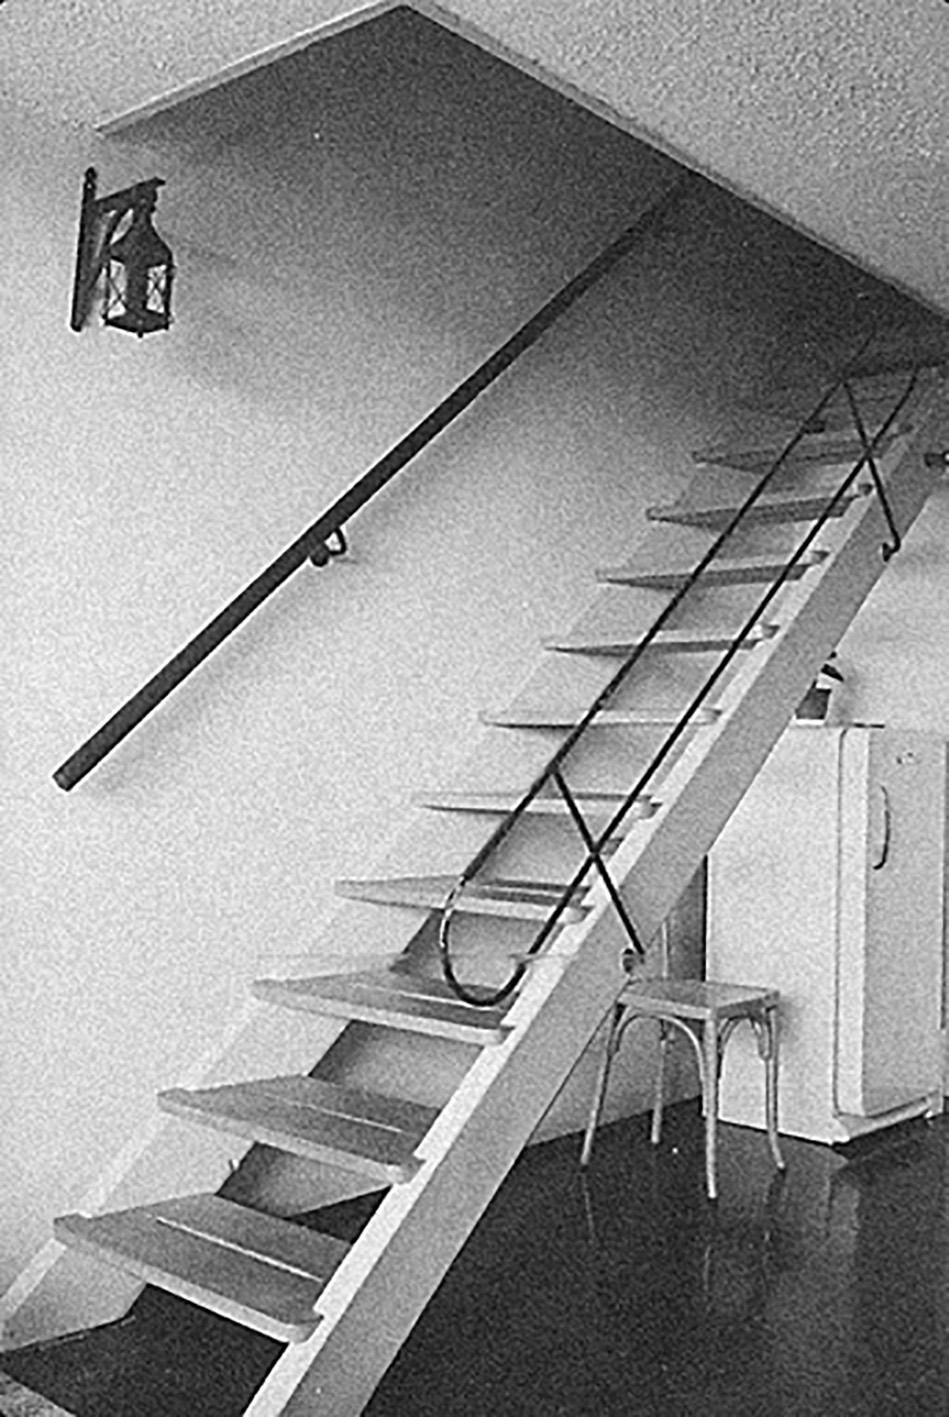 Stairs, Unité d’Habitation, Marseille, 1949 (Le Corbusier, architect). Stringboards in folded sheet steel, tubular handrail and wooden step.